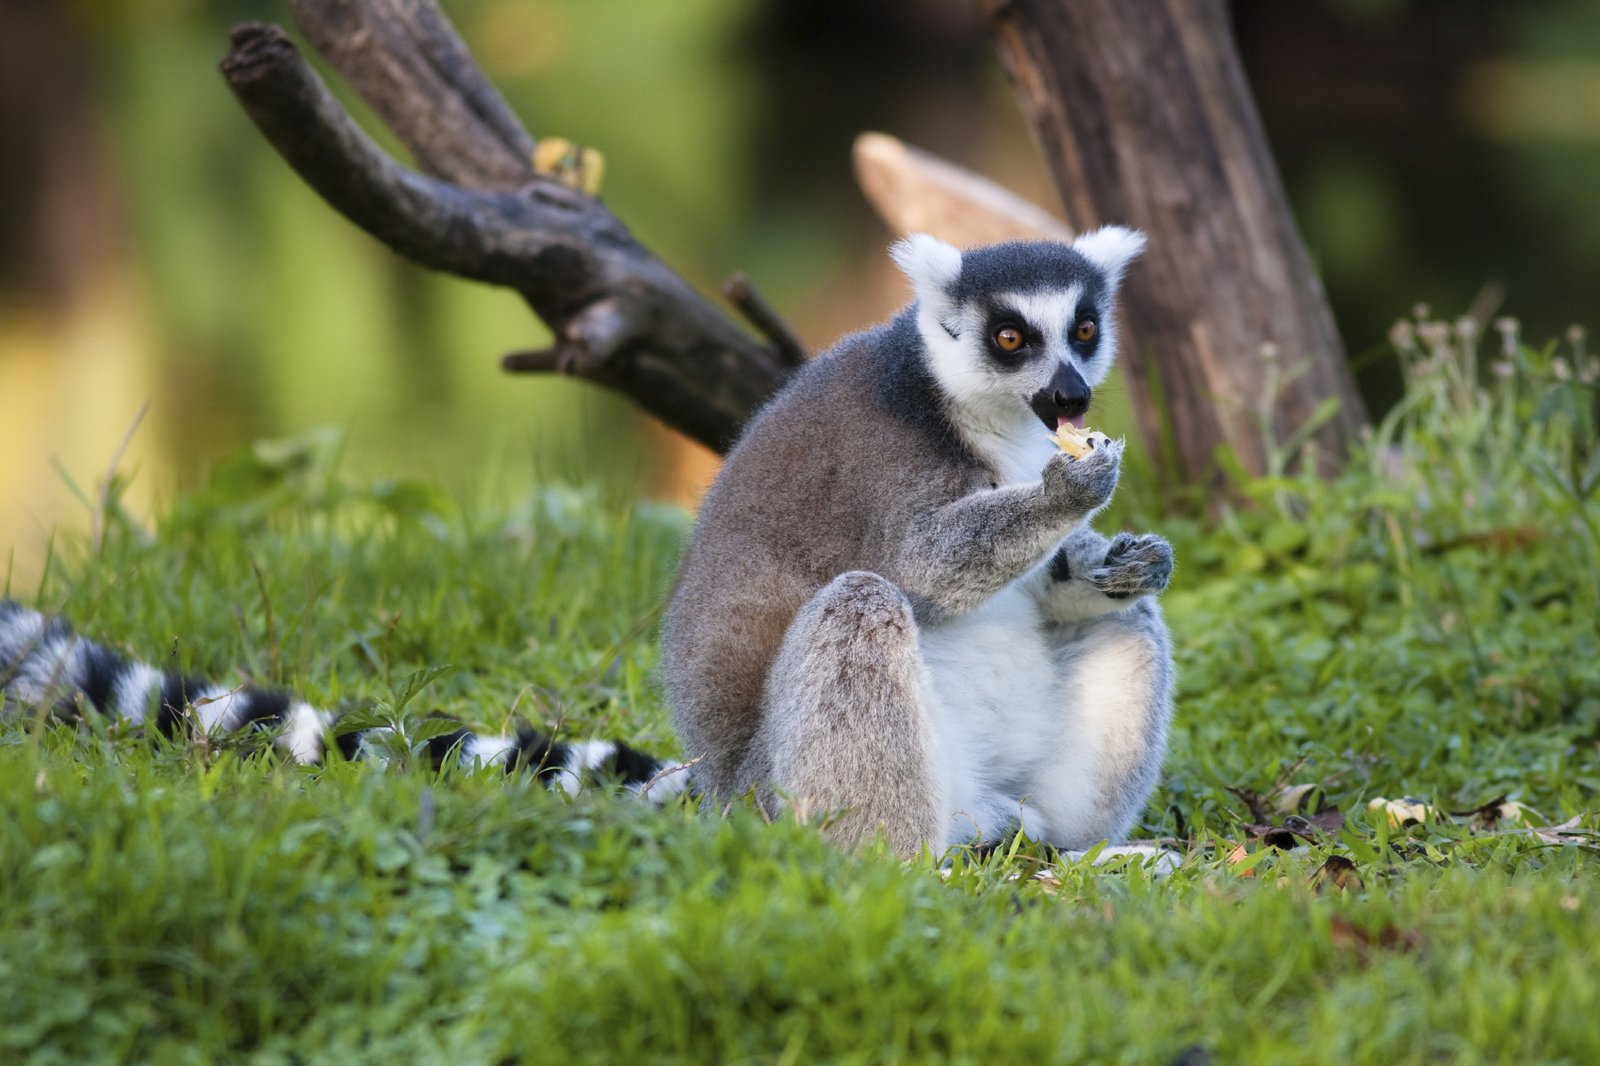 The diet of a lemur consists mostly of leaves and fruit.